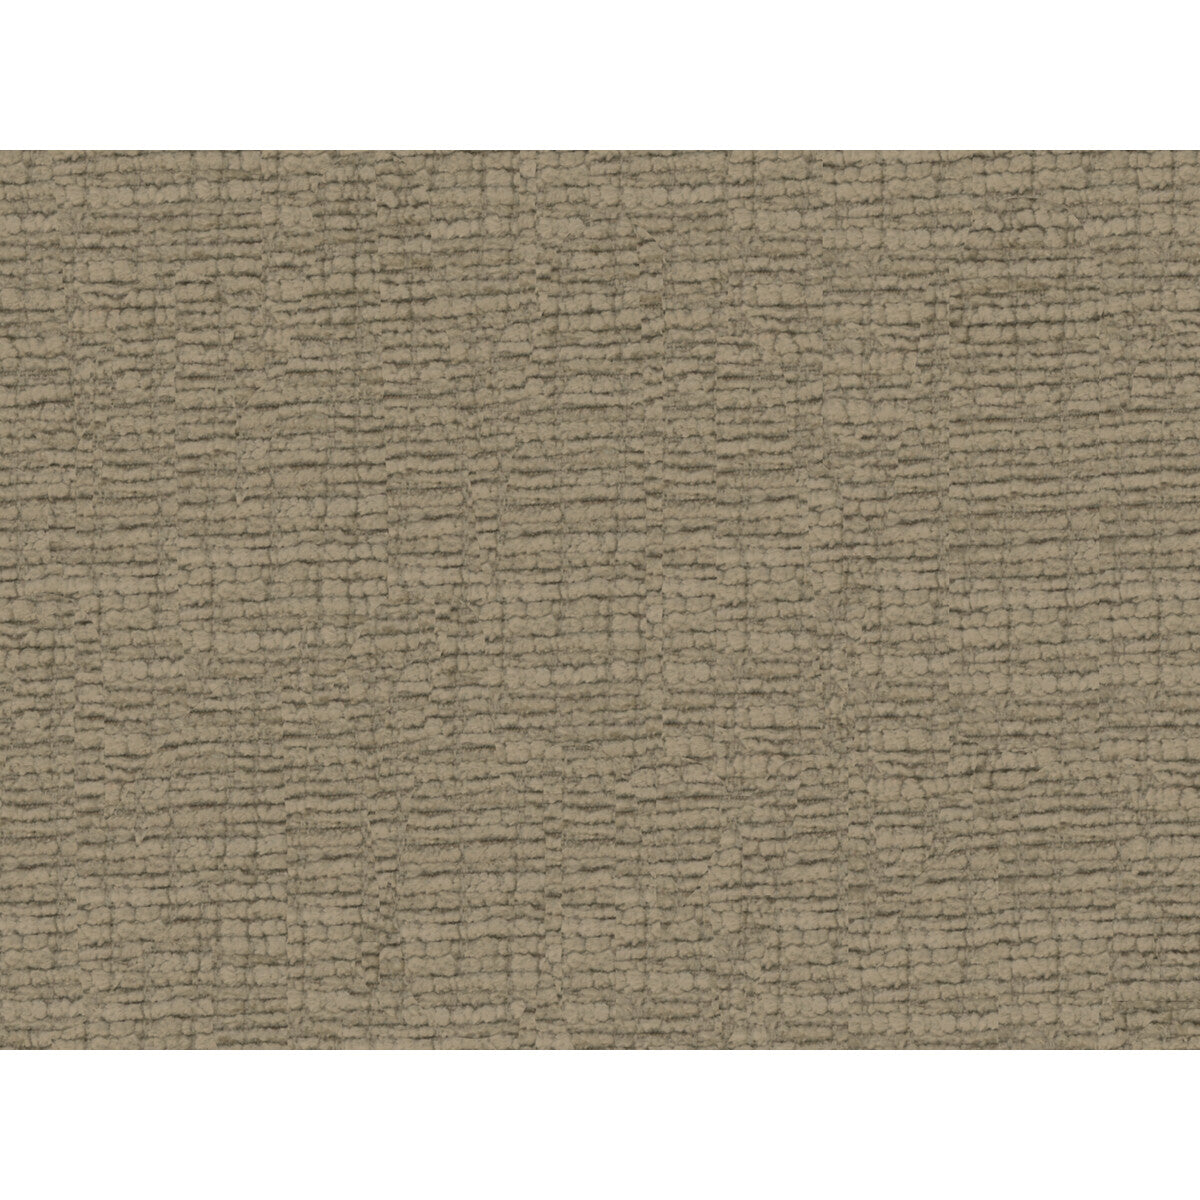 Clever Cut fabric in truffle color - pattern 34456.16.0 - by Kravet Couture